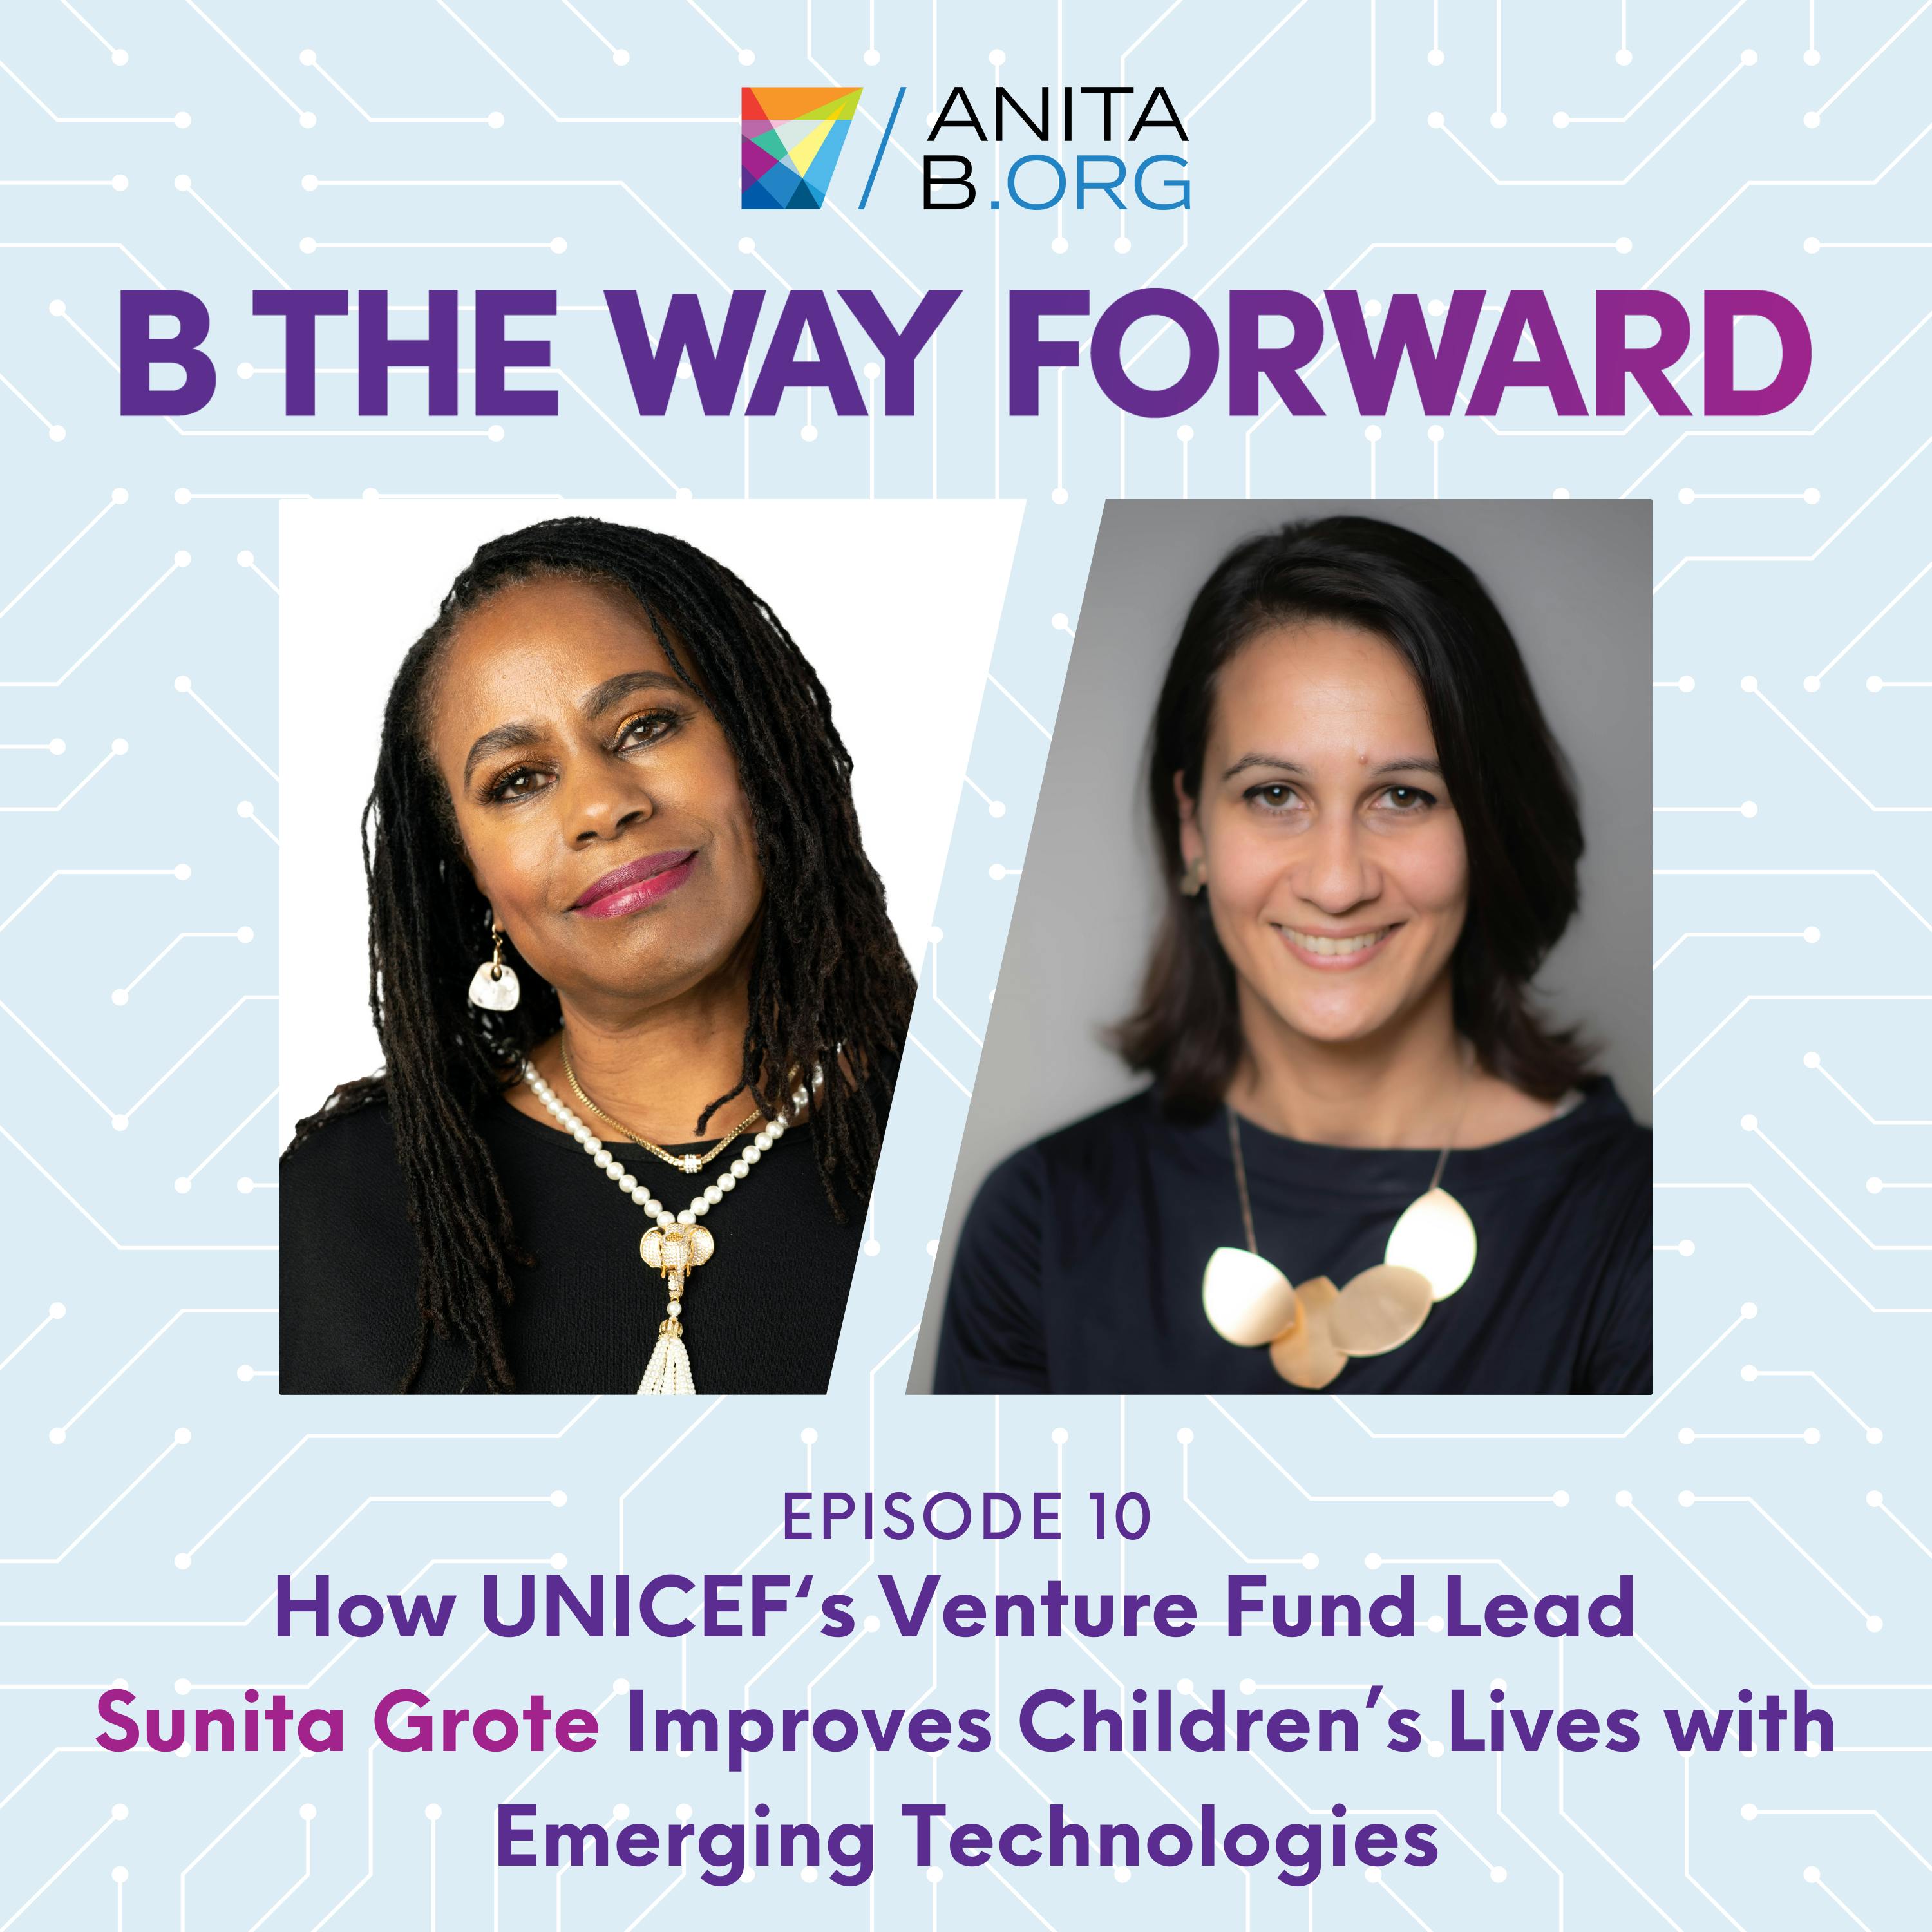 How UNICEF’s Venture Fund Lead Sunita Grote Improves Children’s Lives with Emerging Technologies